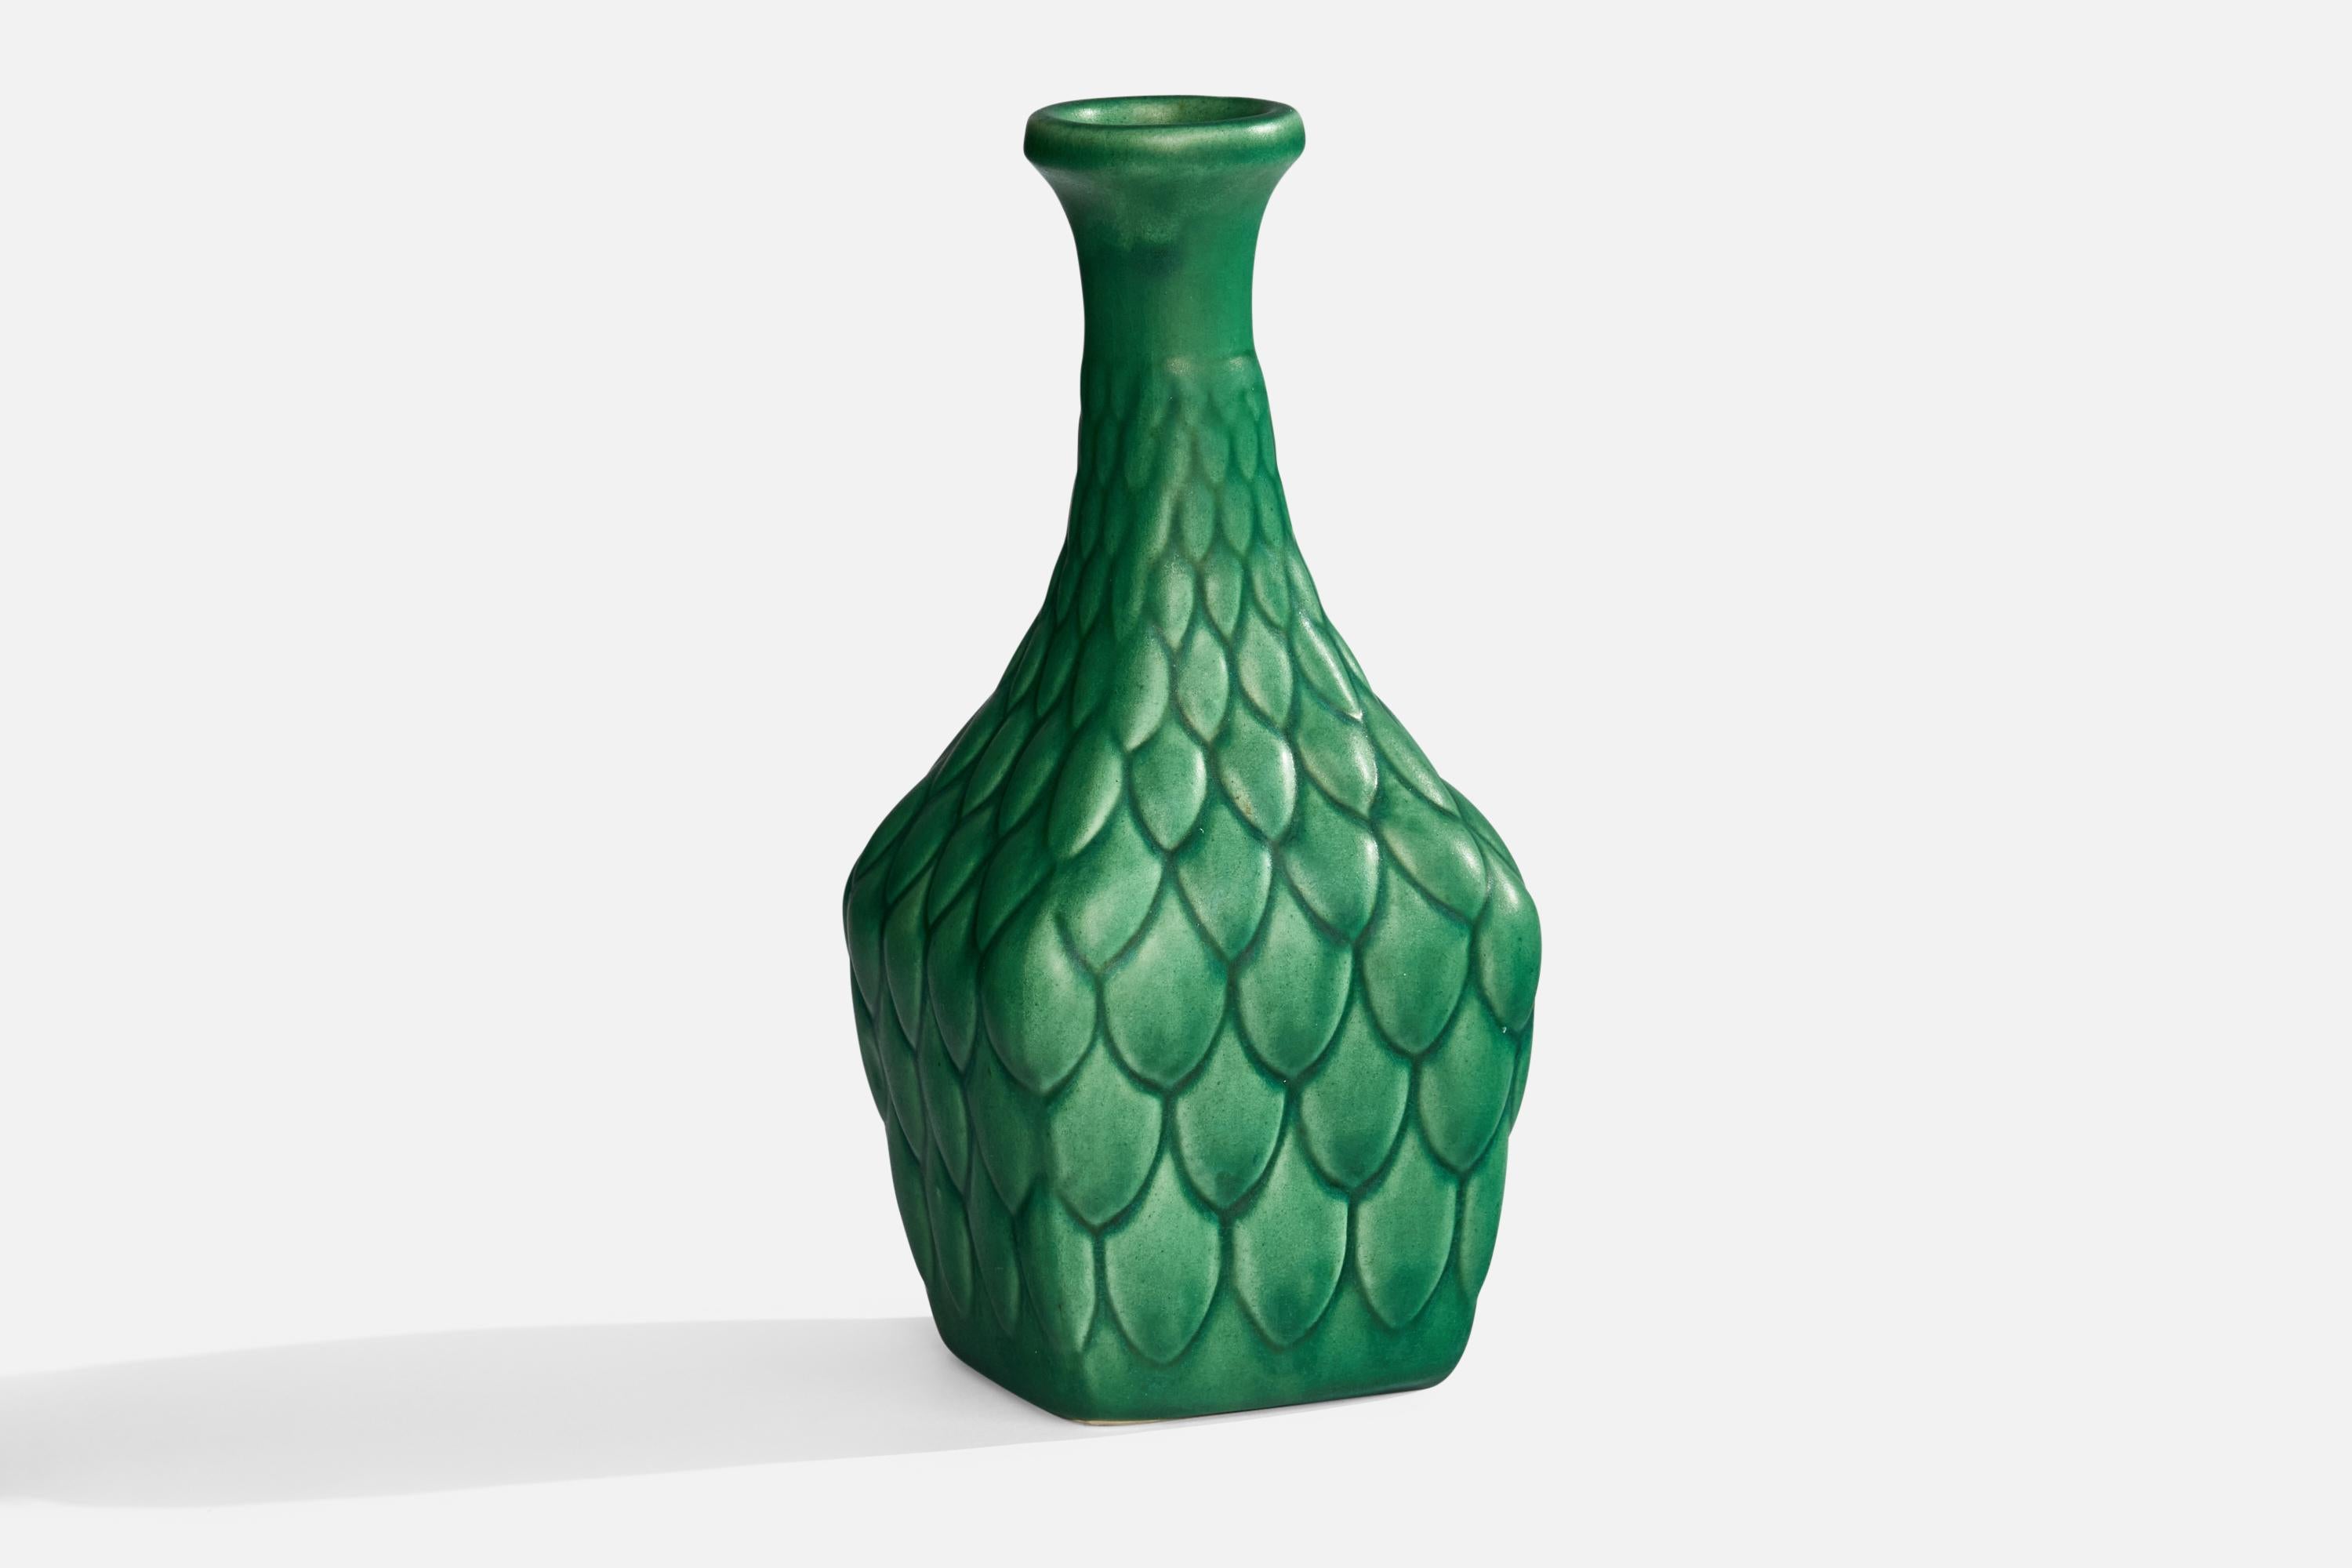 A green-glazed ceramic vase designed and produced by Syco Keramik, Sweden, c. 1930s.